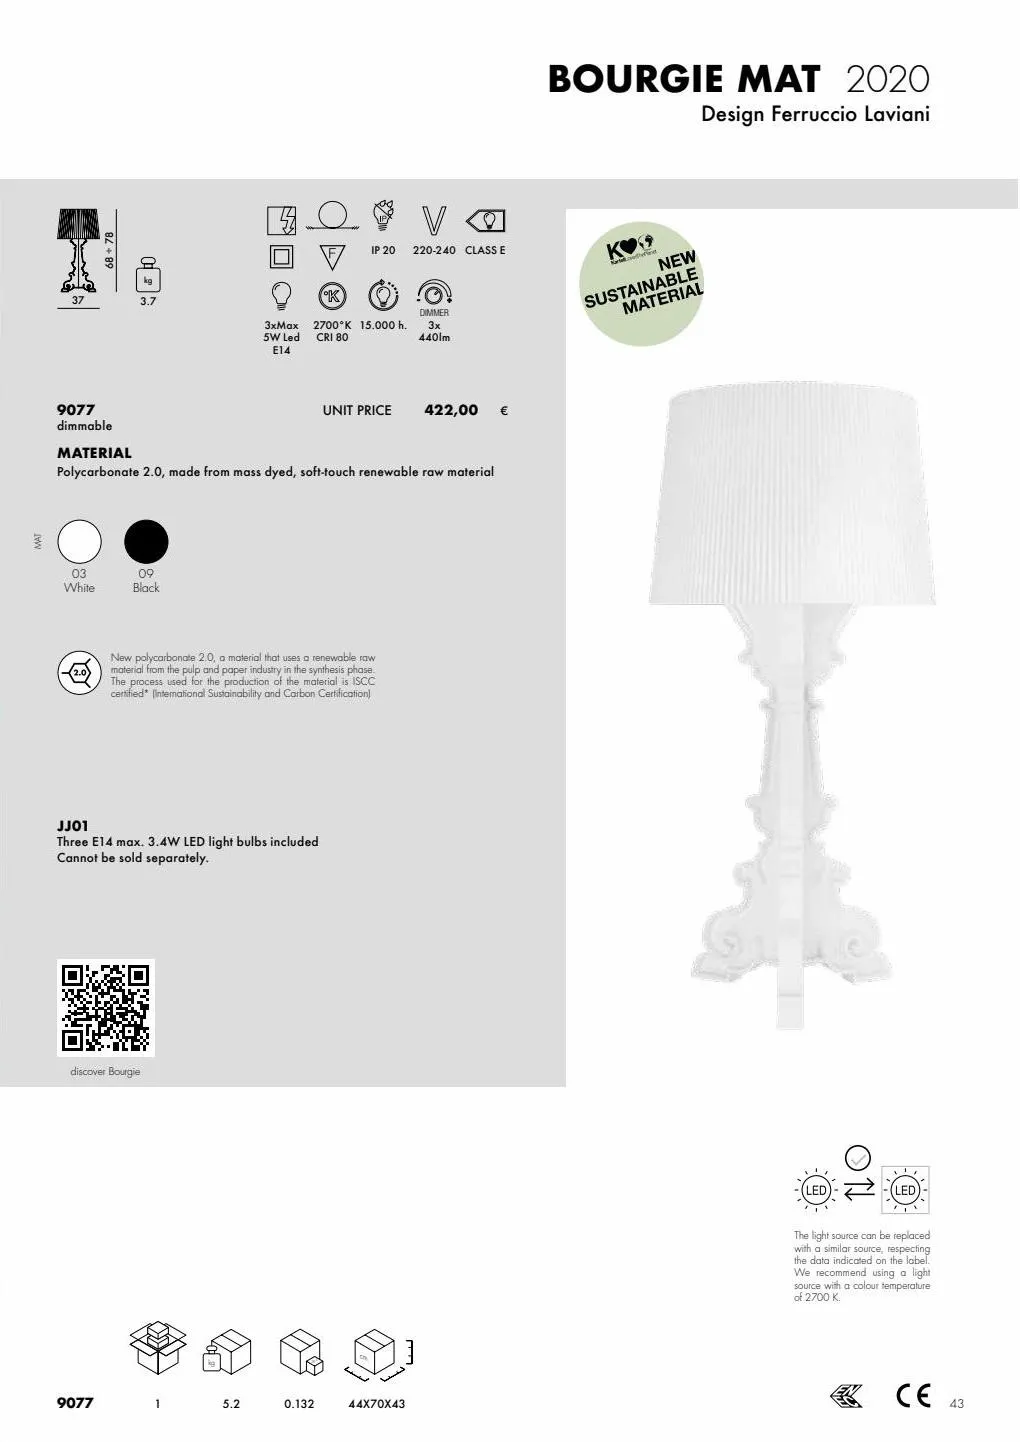 Catalogue 2023 Kartell Lights, page 00043